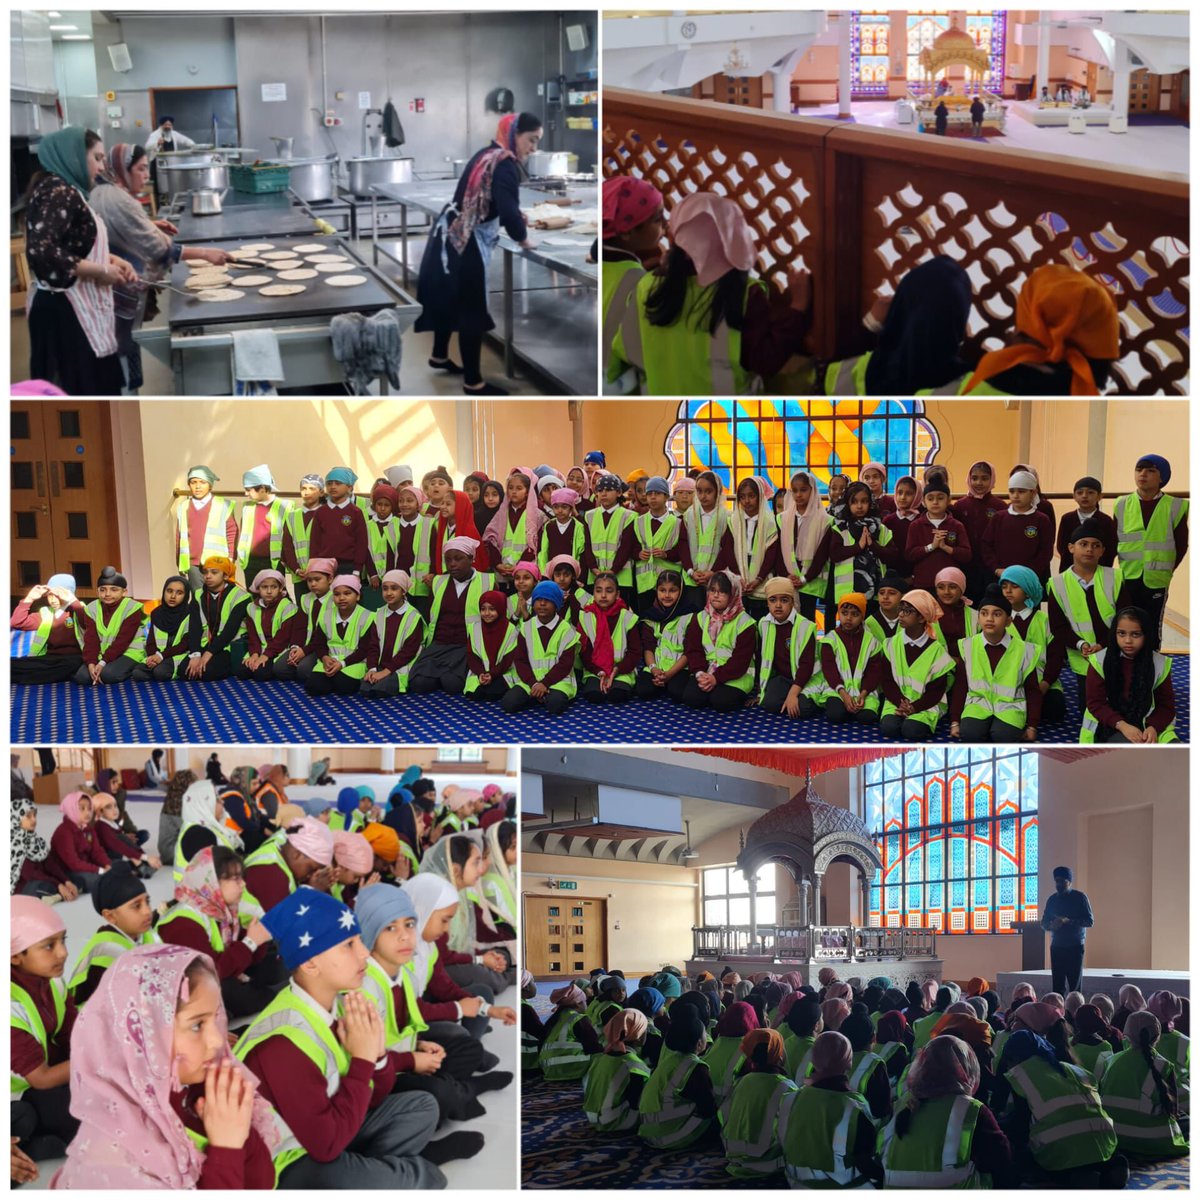 Article 31 #Year 3 visited our local #Gurdwara as an extension of our learning on Sewa in #Sikhism. We learnt a lot from the workshop about Sewa and a tour of the kitchens. We then enjoyed the langar